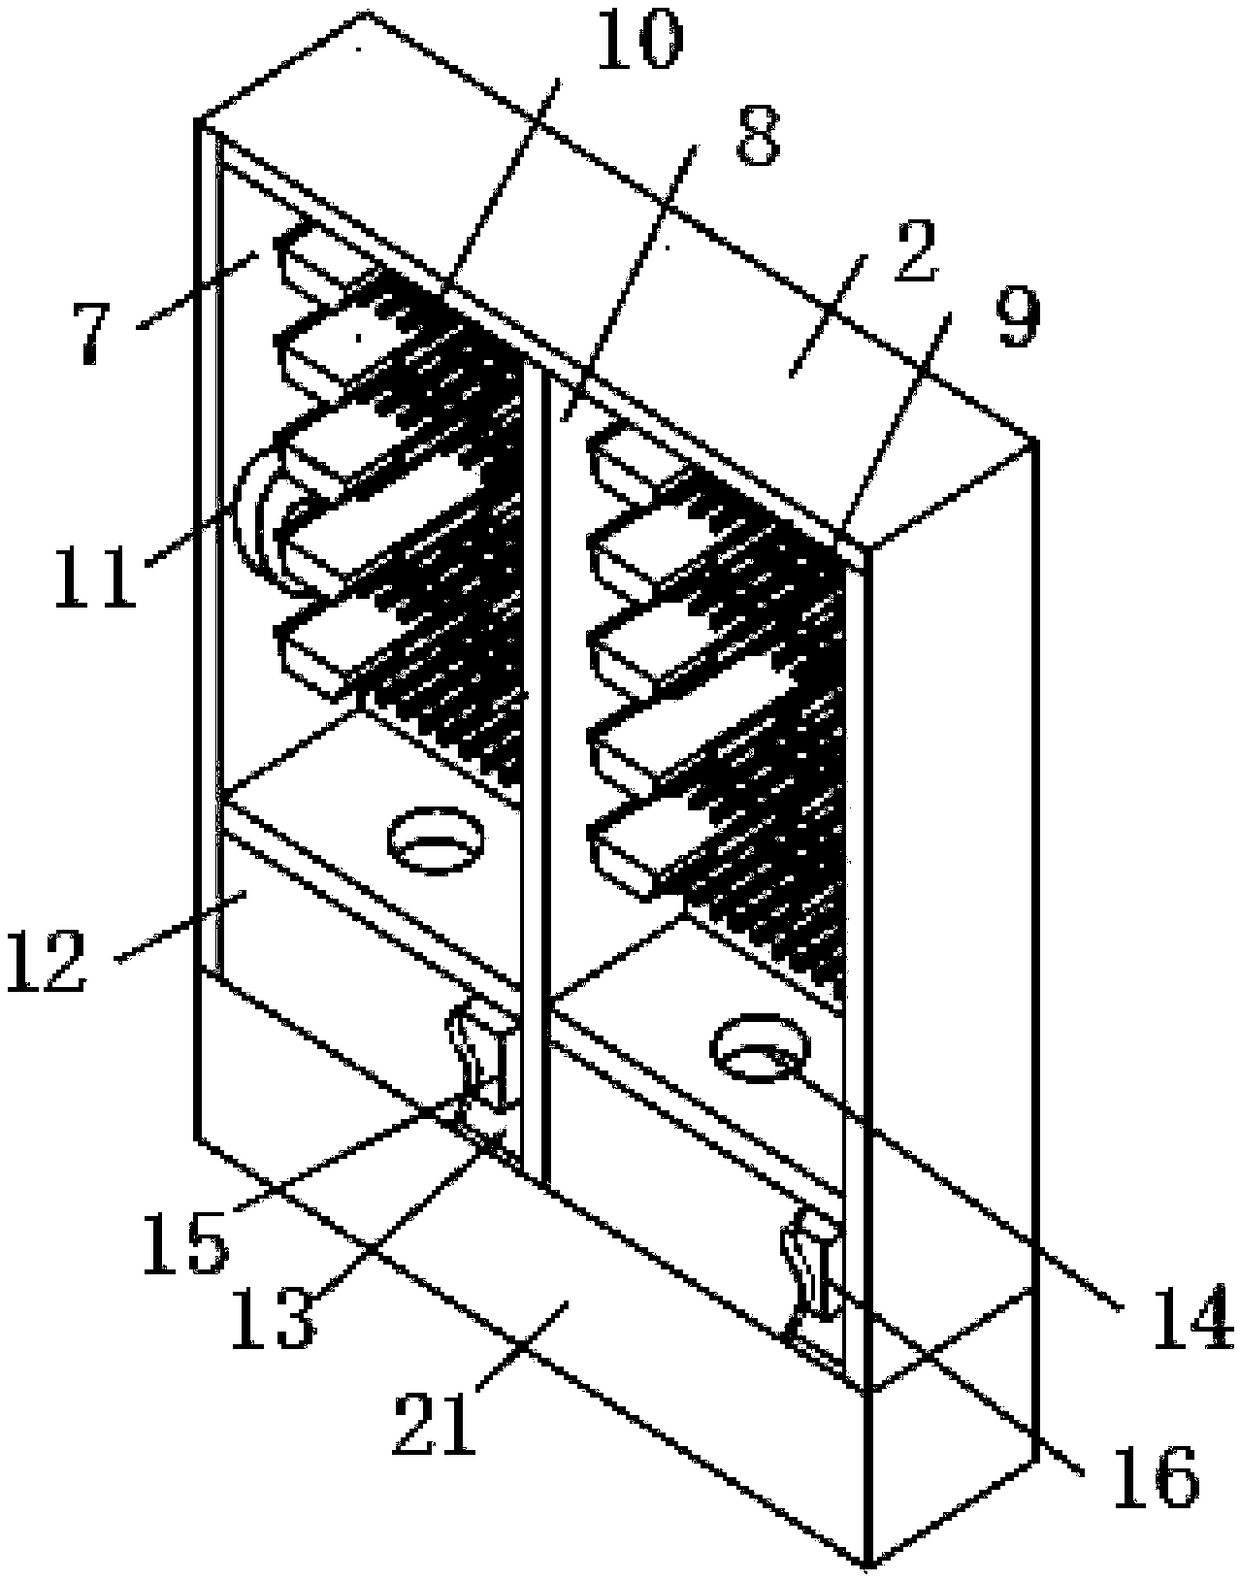 Shelf type storage equipment capable of automatically recognizing goods and working method